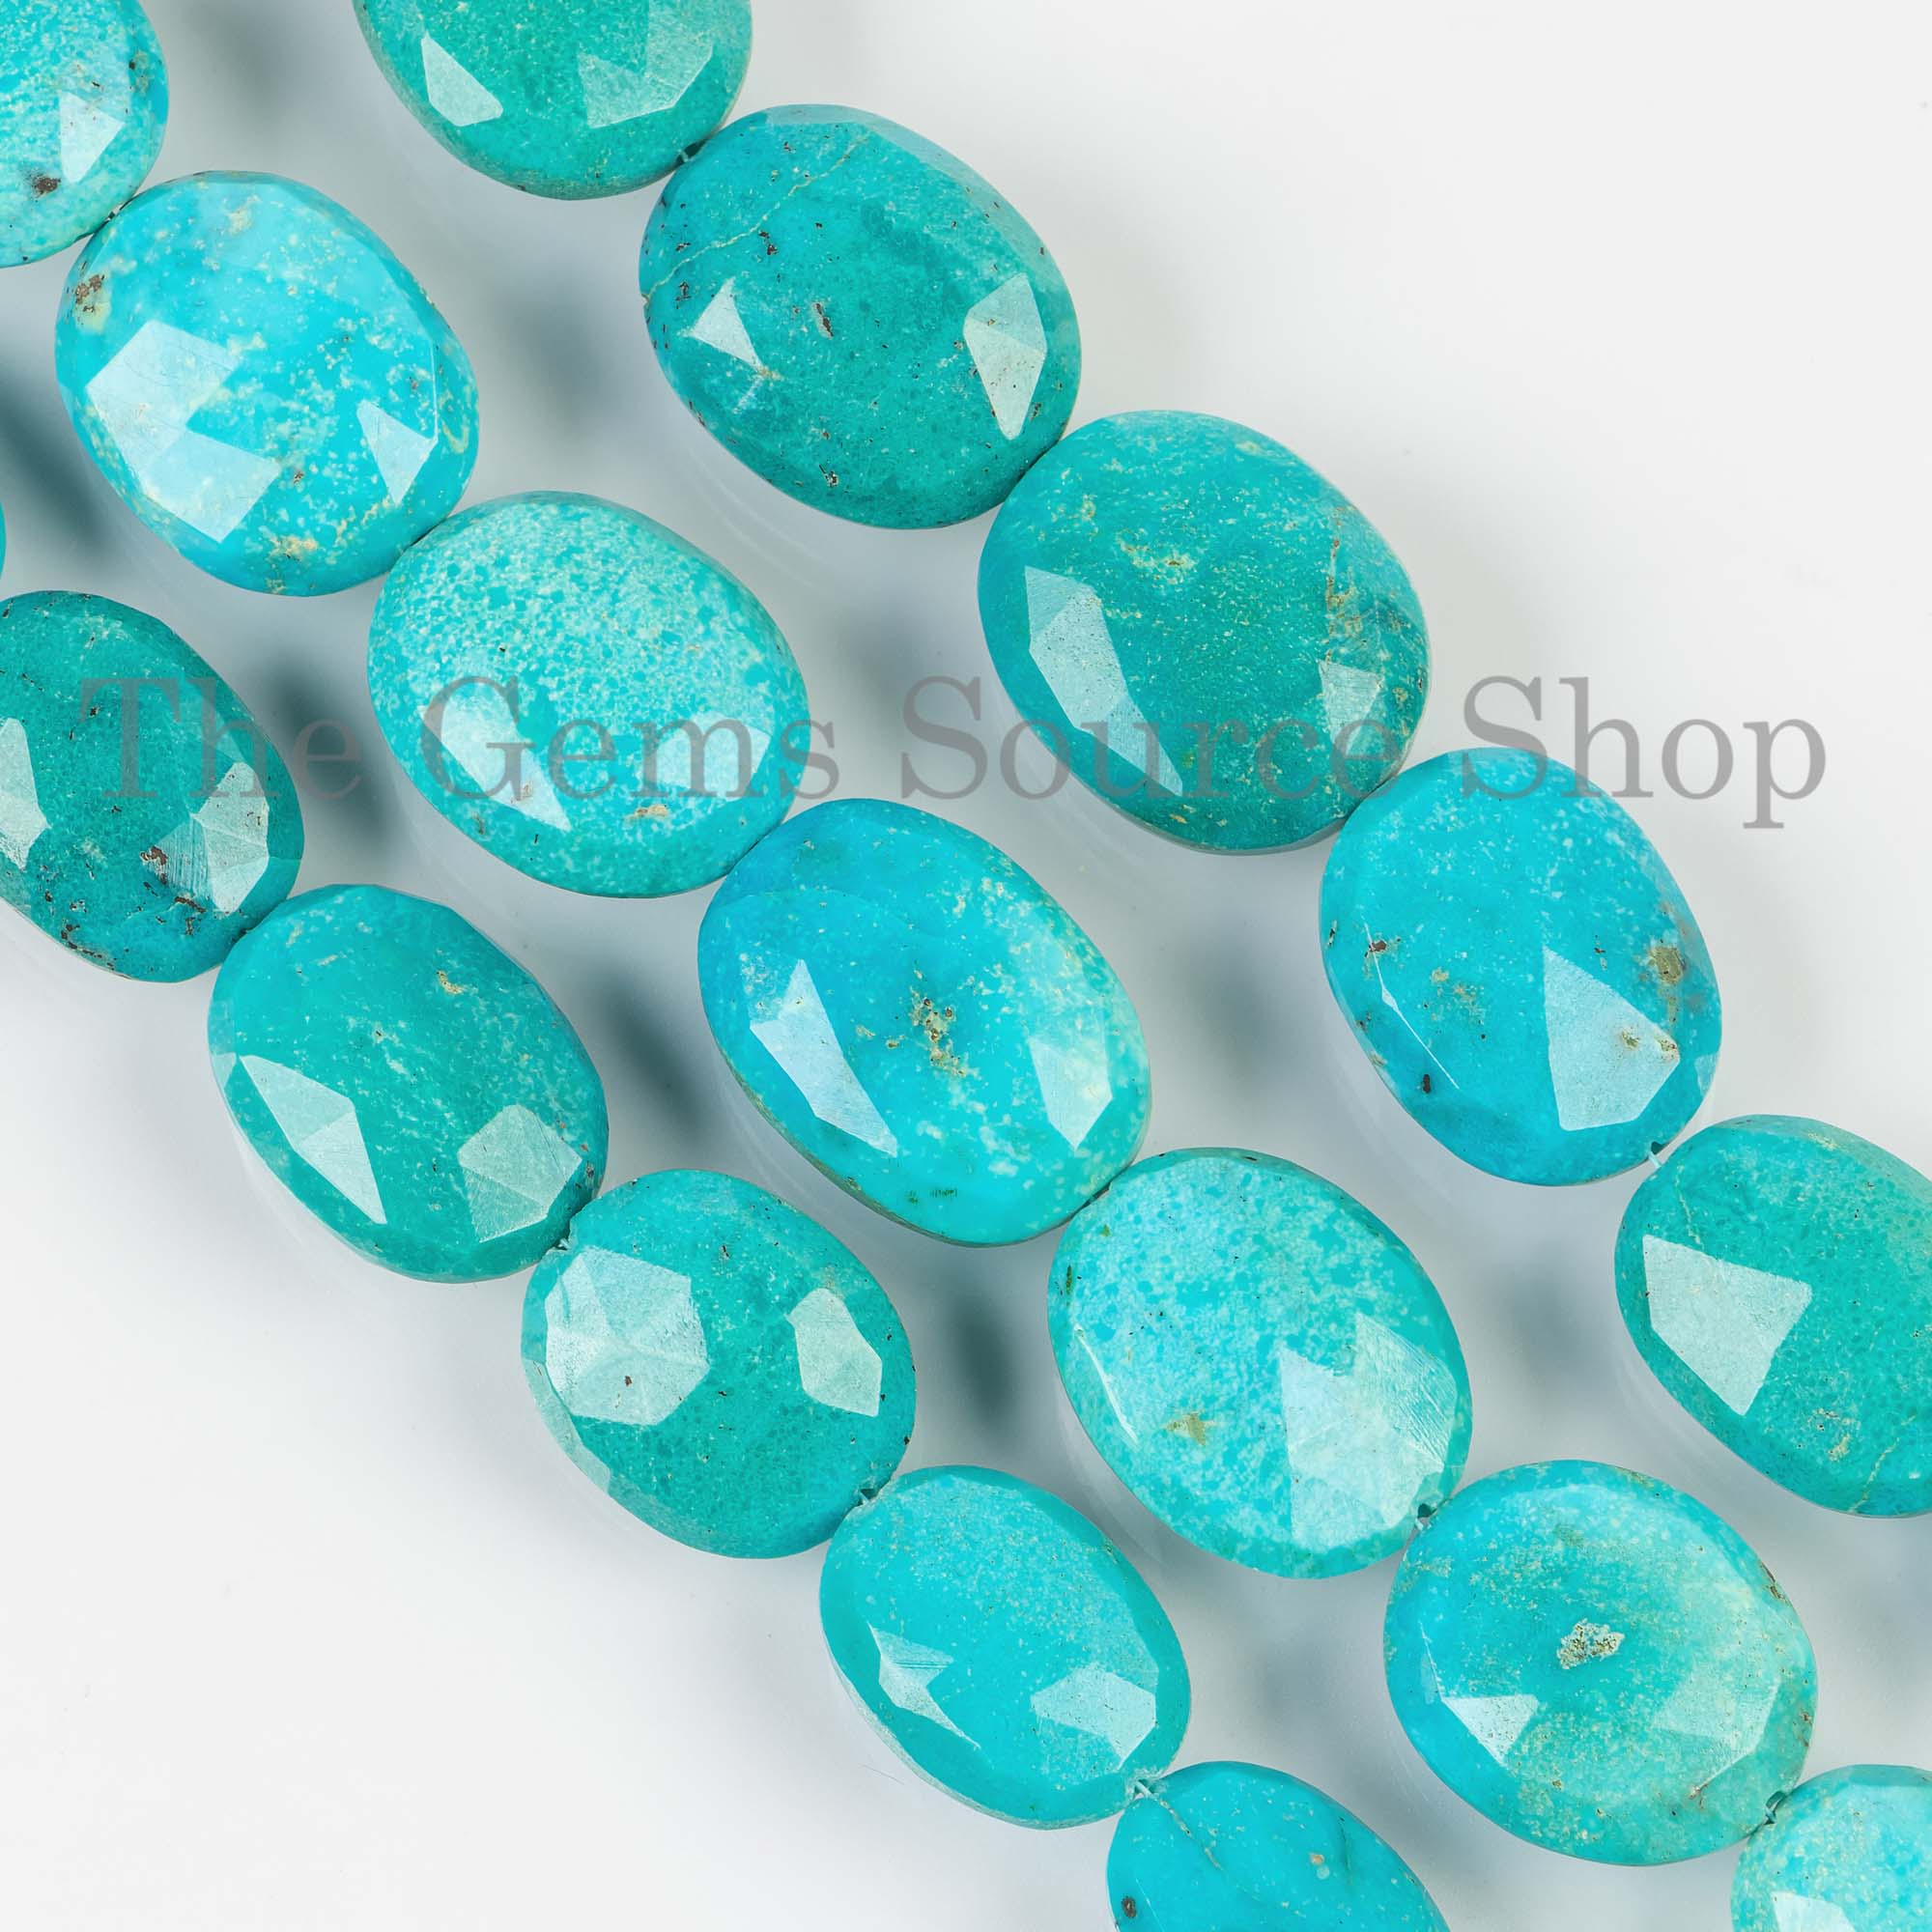 Turquoise Faceted Oval Beads, Turquoise Beads, 13x16-17x22mm Turquoise Gemstone, Turquoise Oval Briolette, Turquoise Wholesale